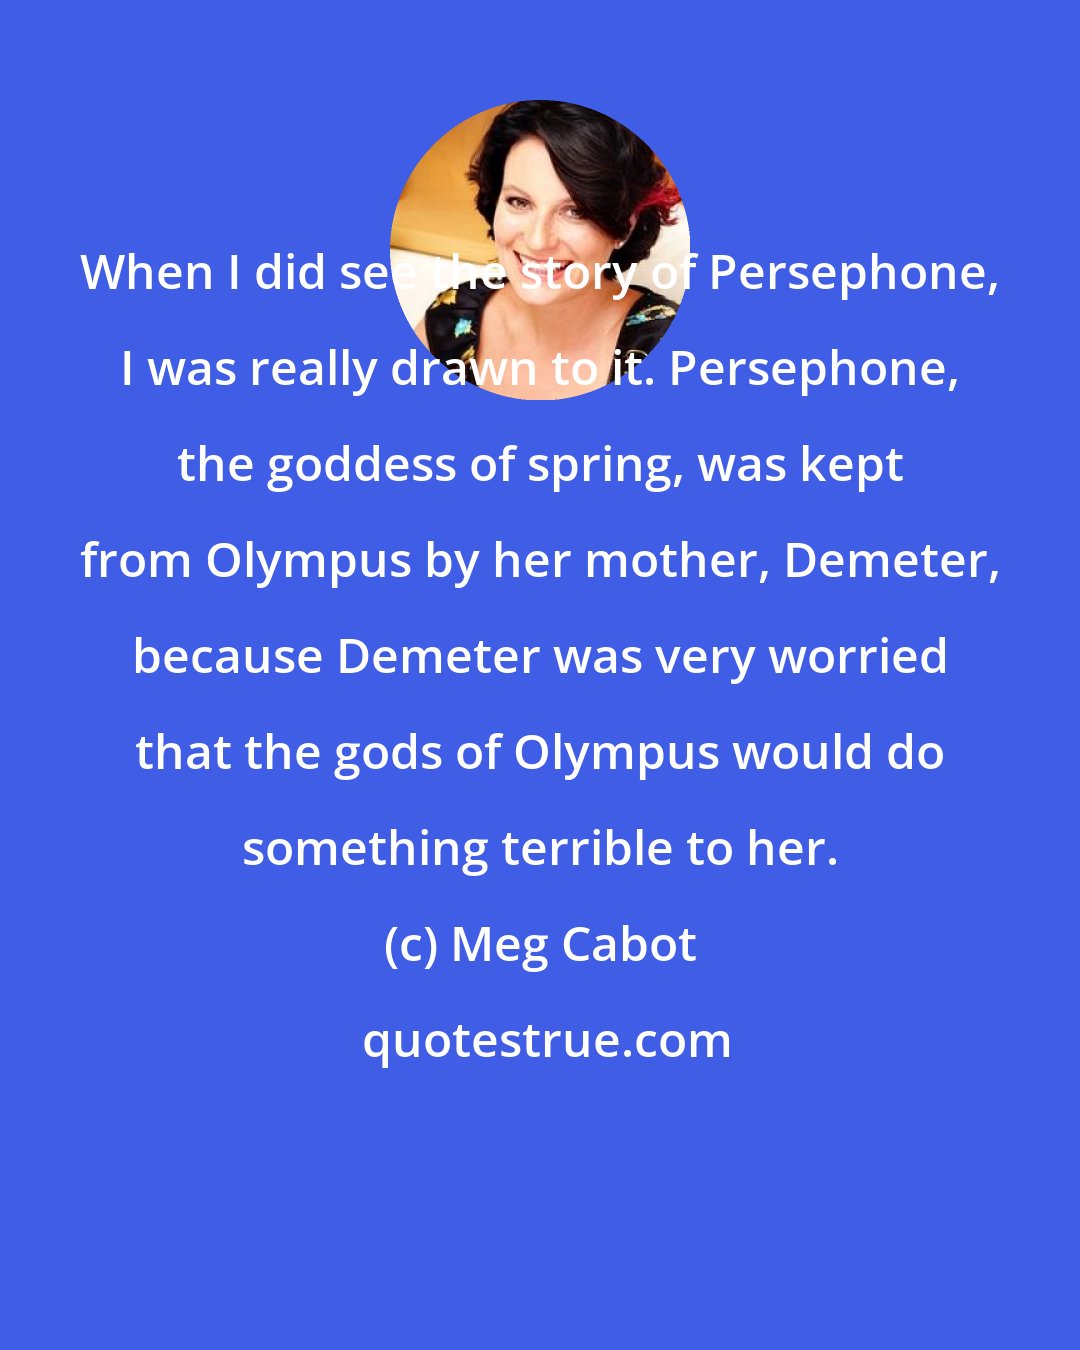 Meg Cabot: When I did see the story of Persephone, I was really drawn to it. Persephone, the goddess of spring, was kept from Olympus by her mother, Demeter, because Demeter was very worried that the gods of Olympus would do something terrible to her.